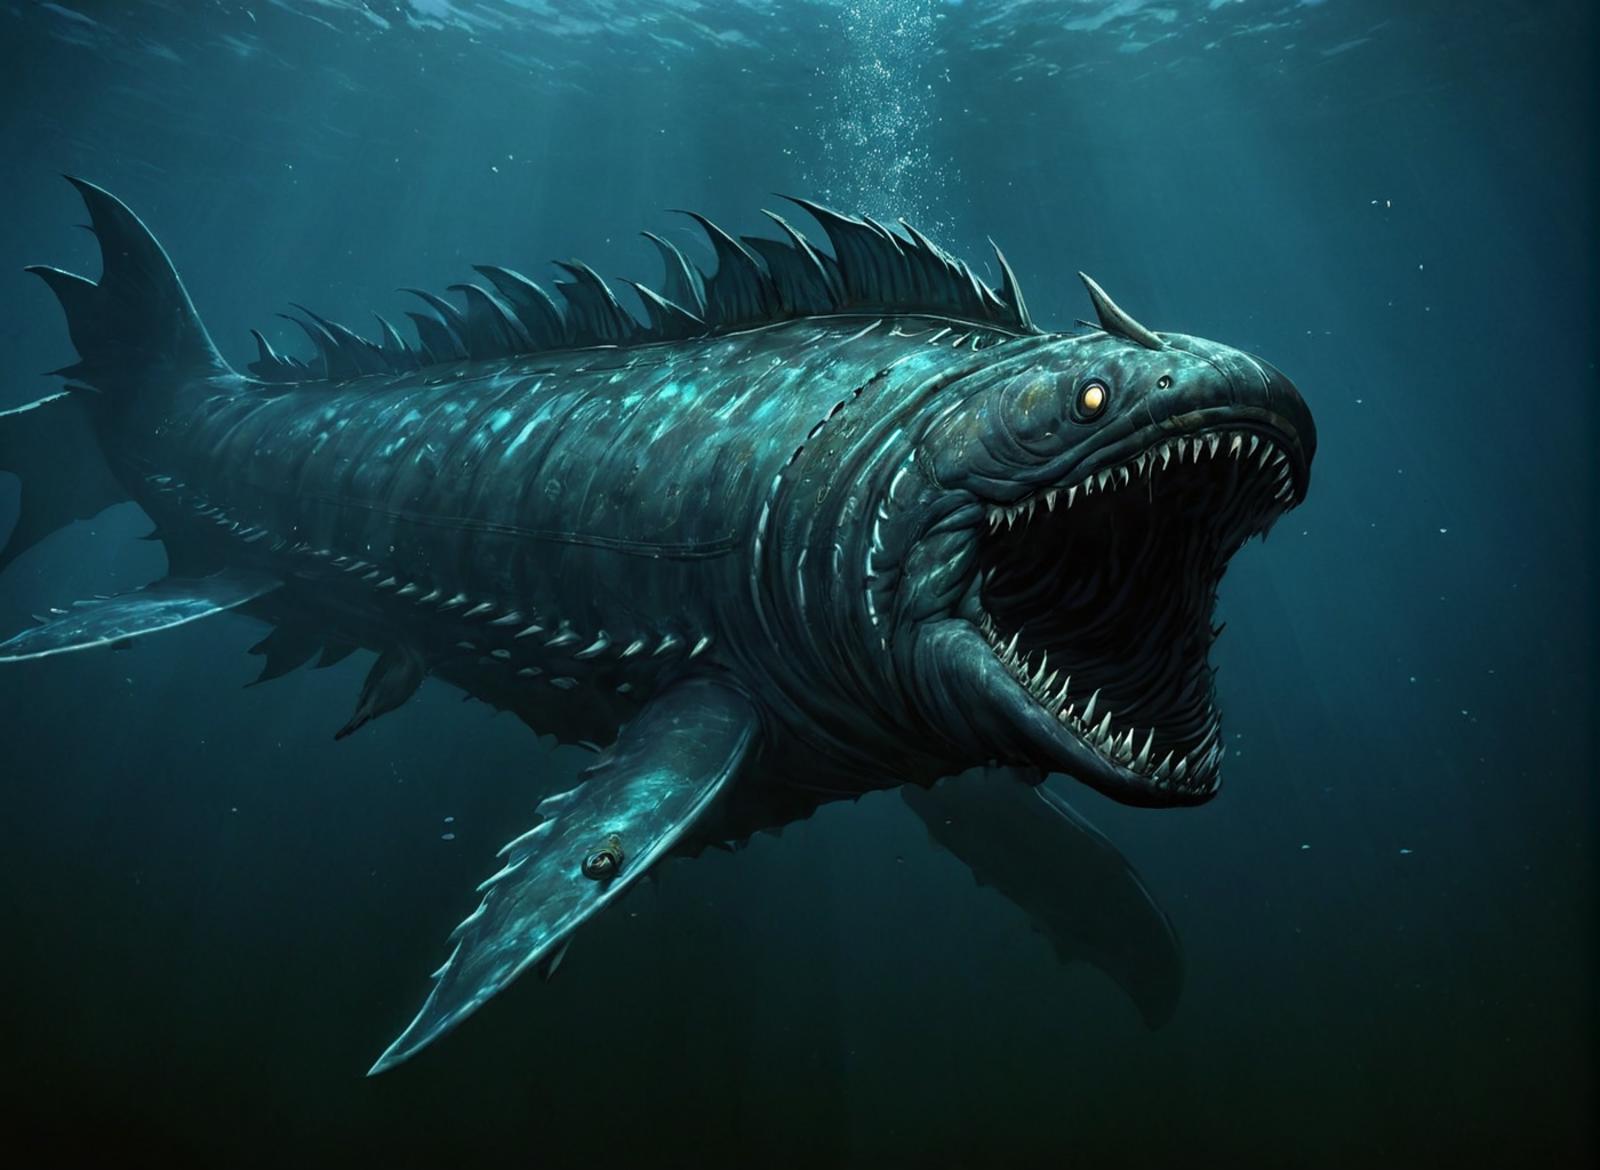 A large blue sea monster with sharp teeth and a menacing expression.